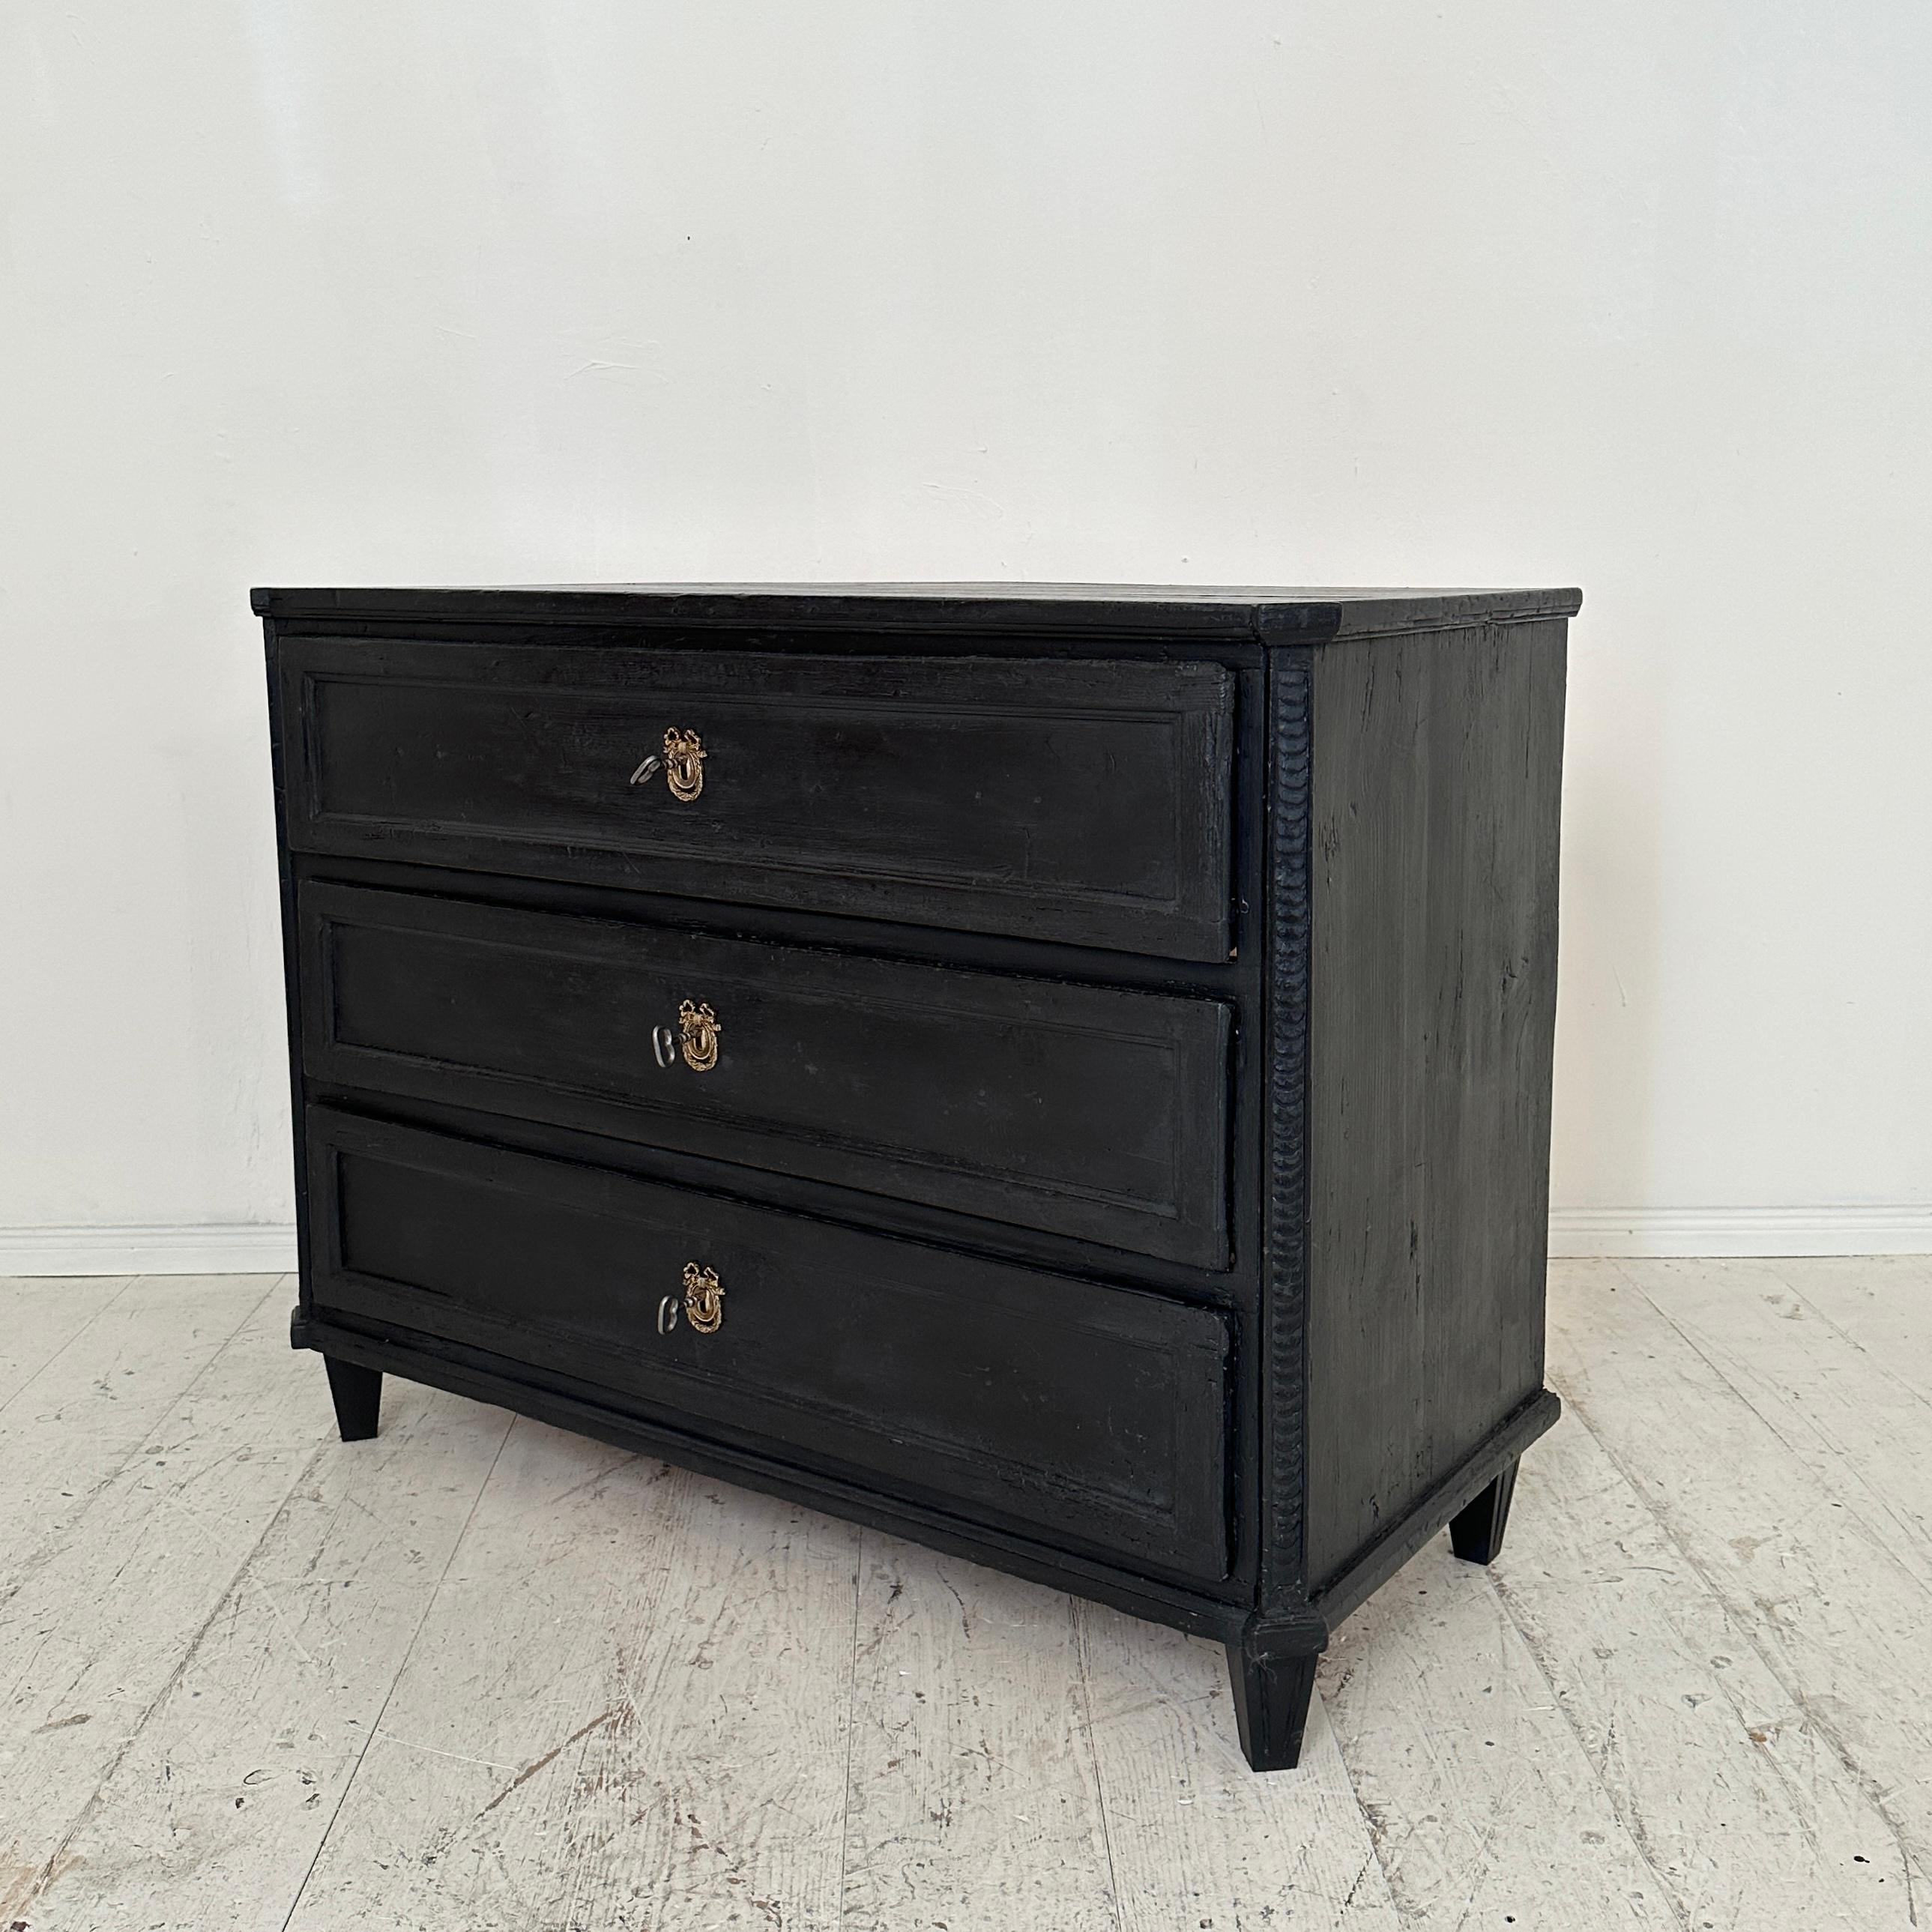 Early 19th Century Black Empire Chest of Drawers with 3 Drawers, around 1800 For Sale 2